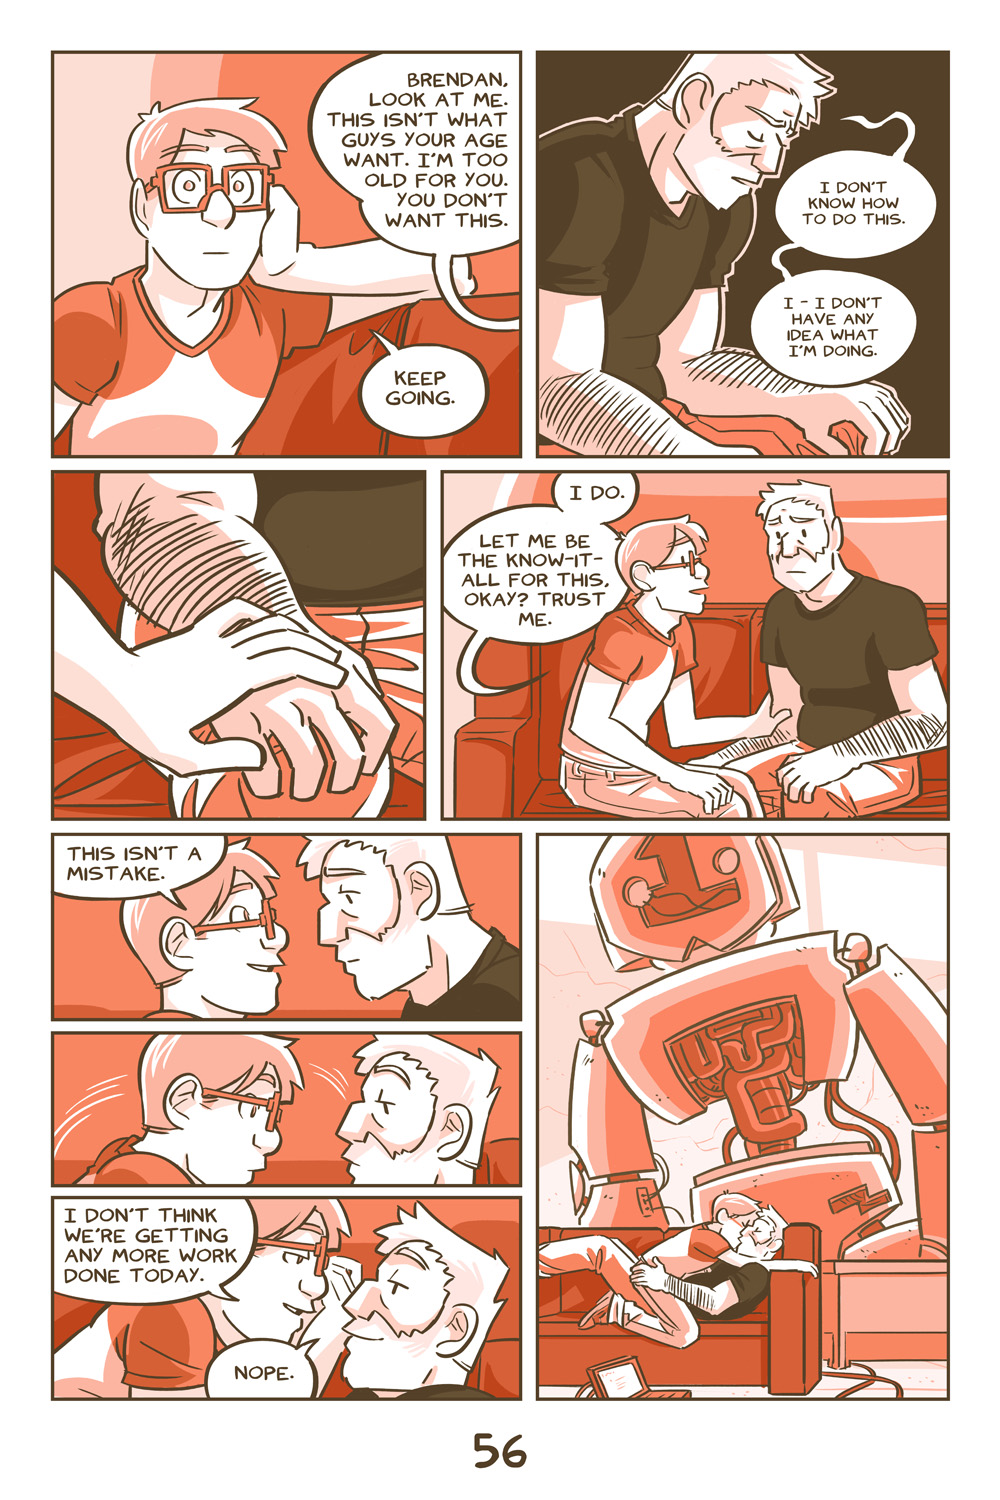 Chapter 2, Page 56